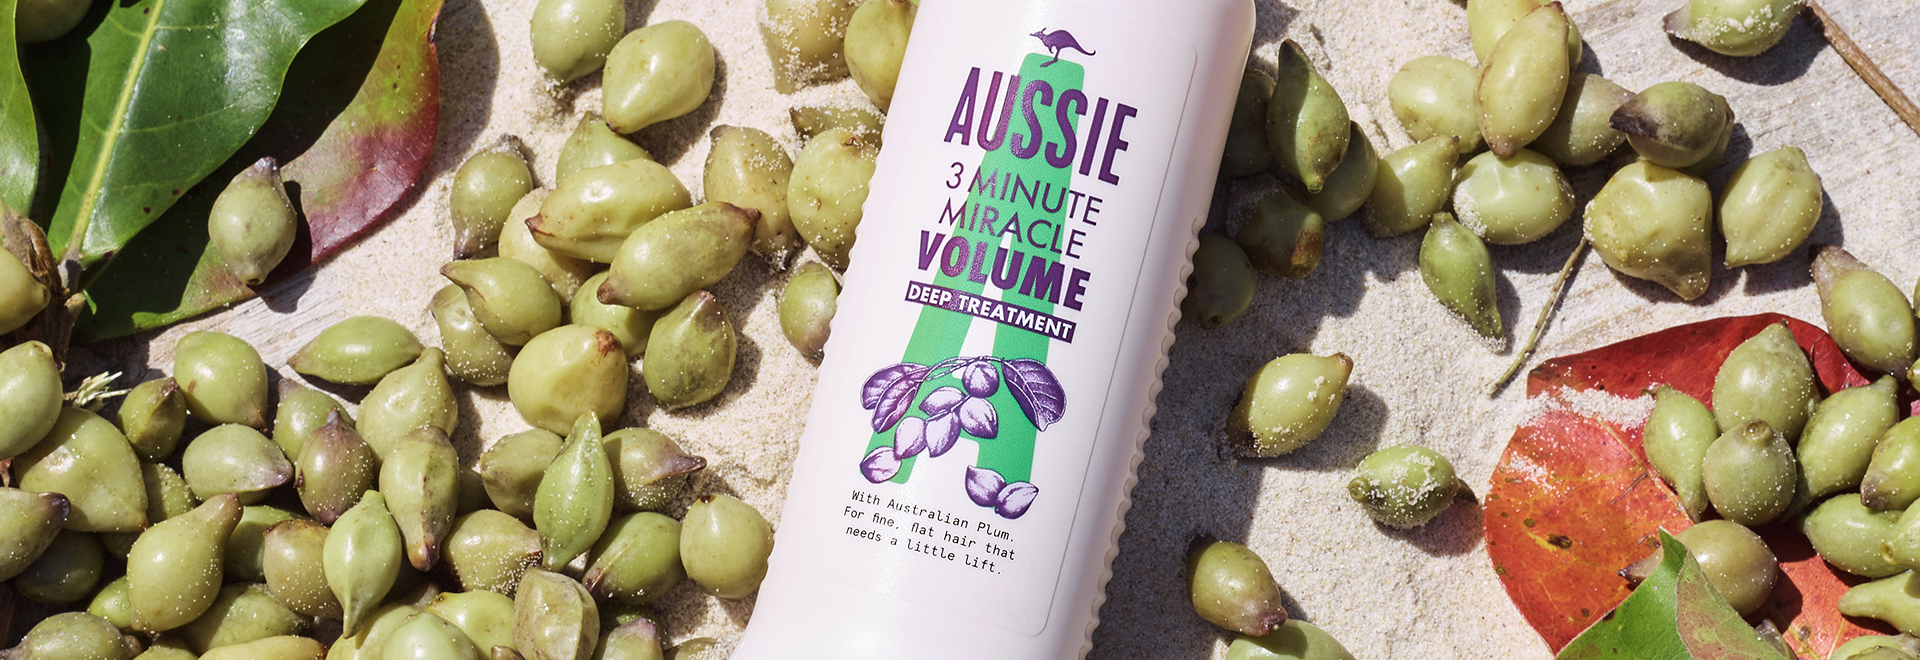 A Aussie Shampoo bottle surrounded by kakadu plums on the sand 